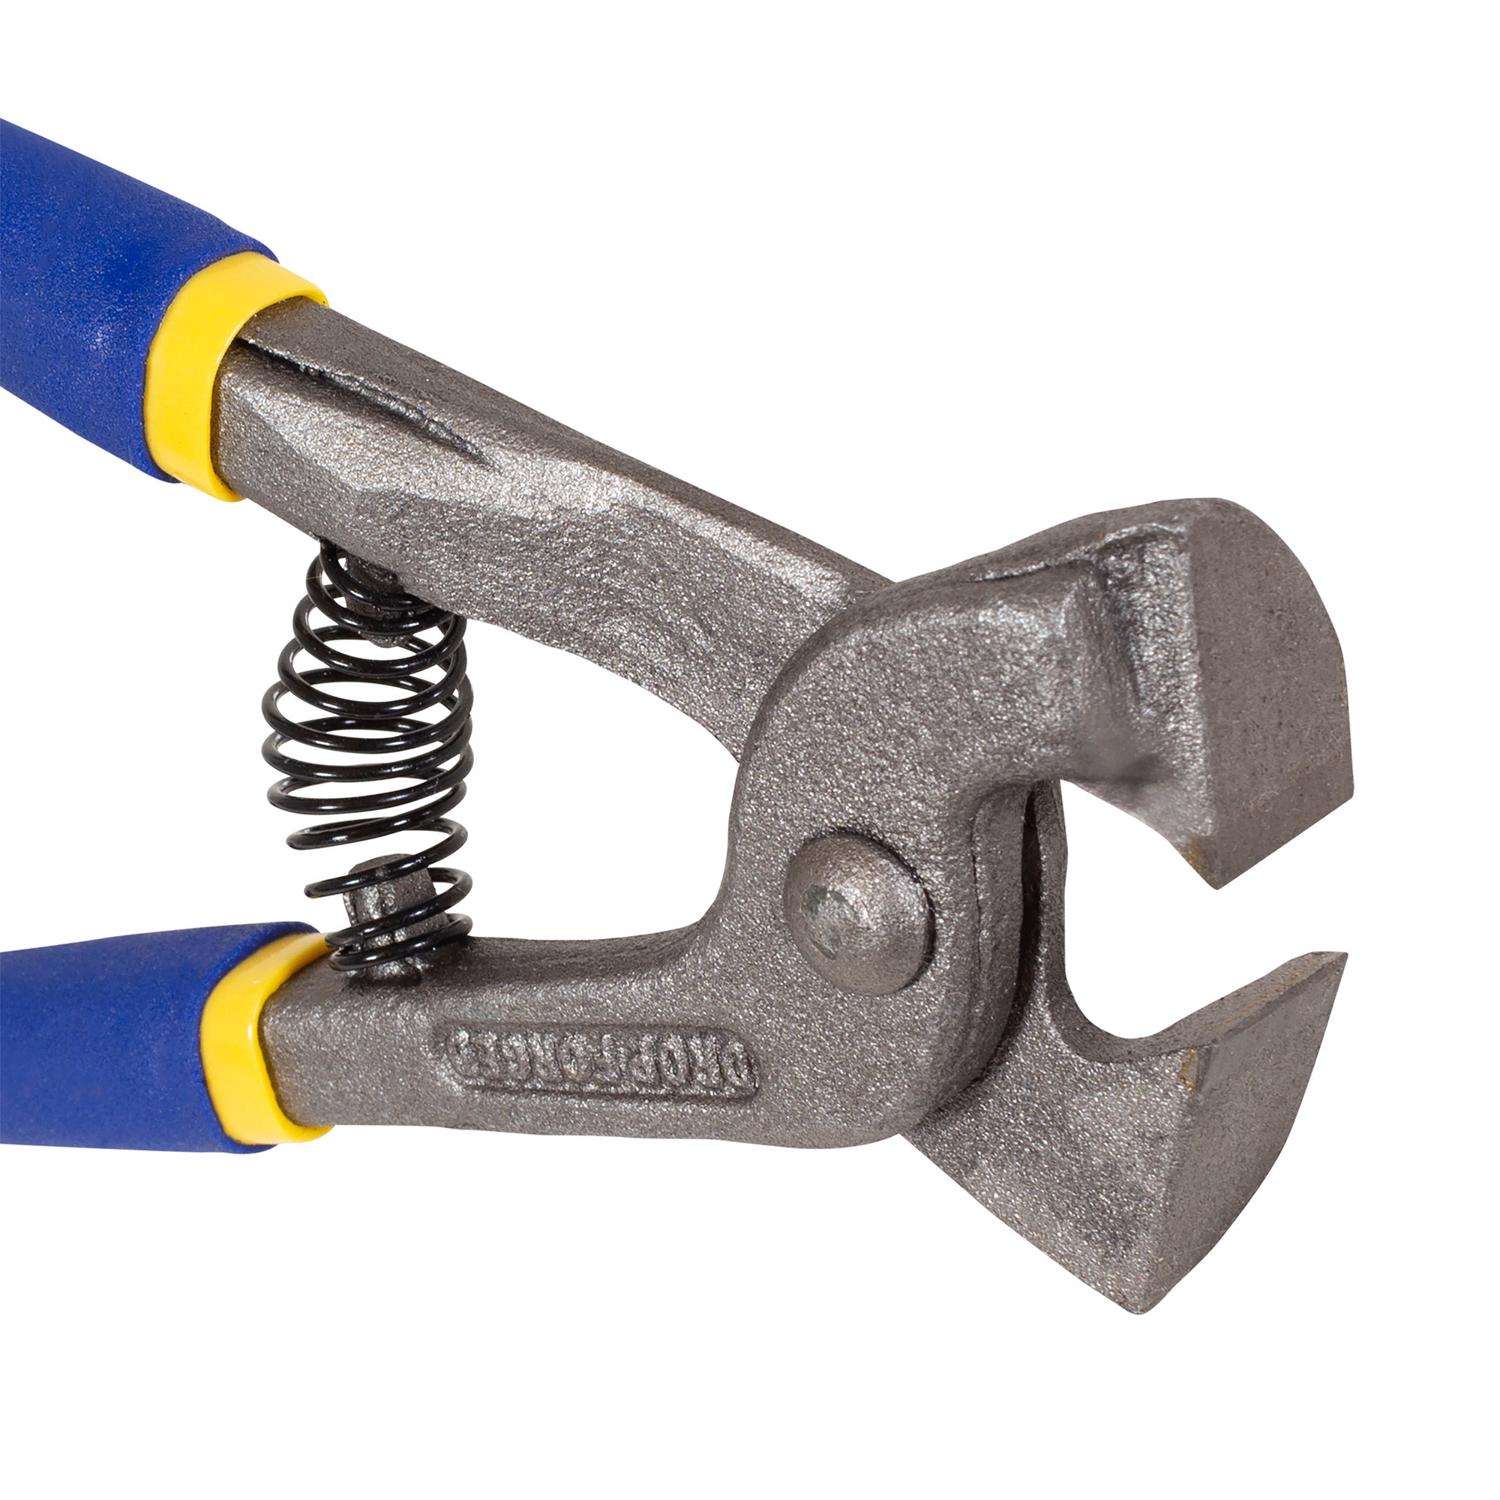 How to Use Tile Nippers